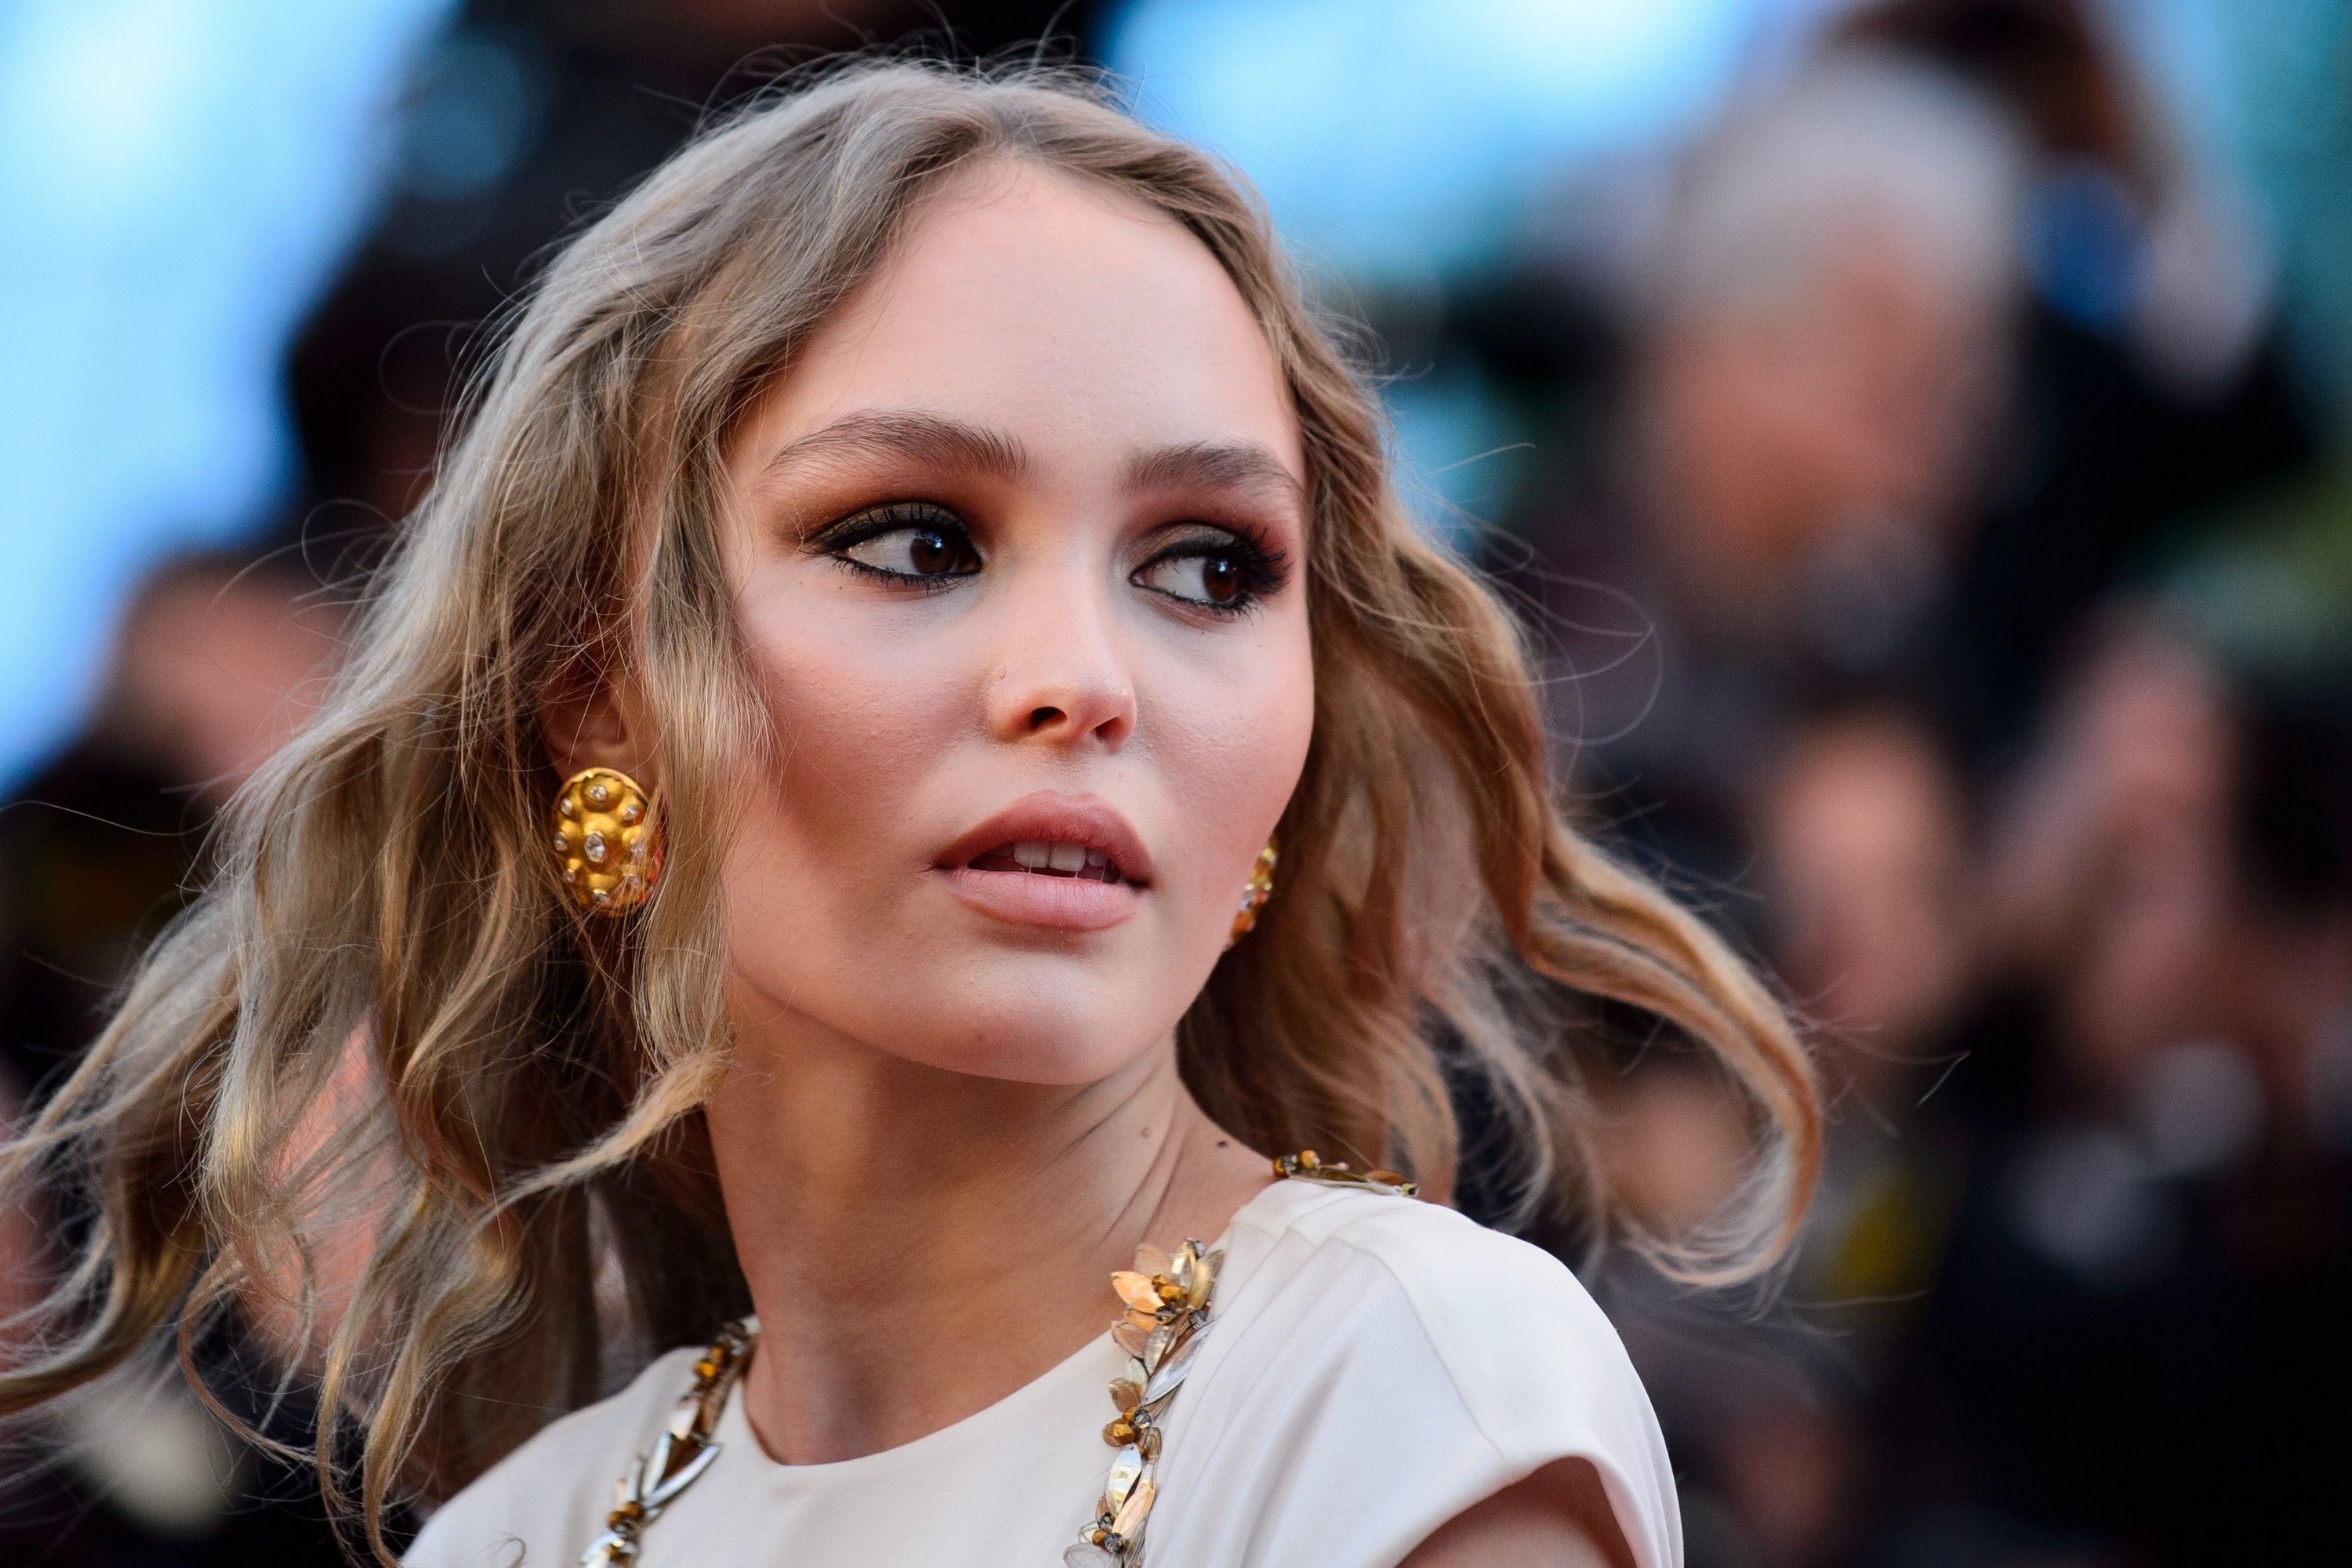 Lily-Rose Depp, HD wallpapers, Fashionable backgrounds, Celeb style, 3000x2000 HD Desktop